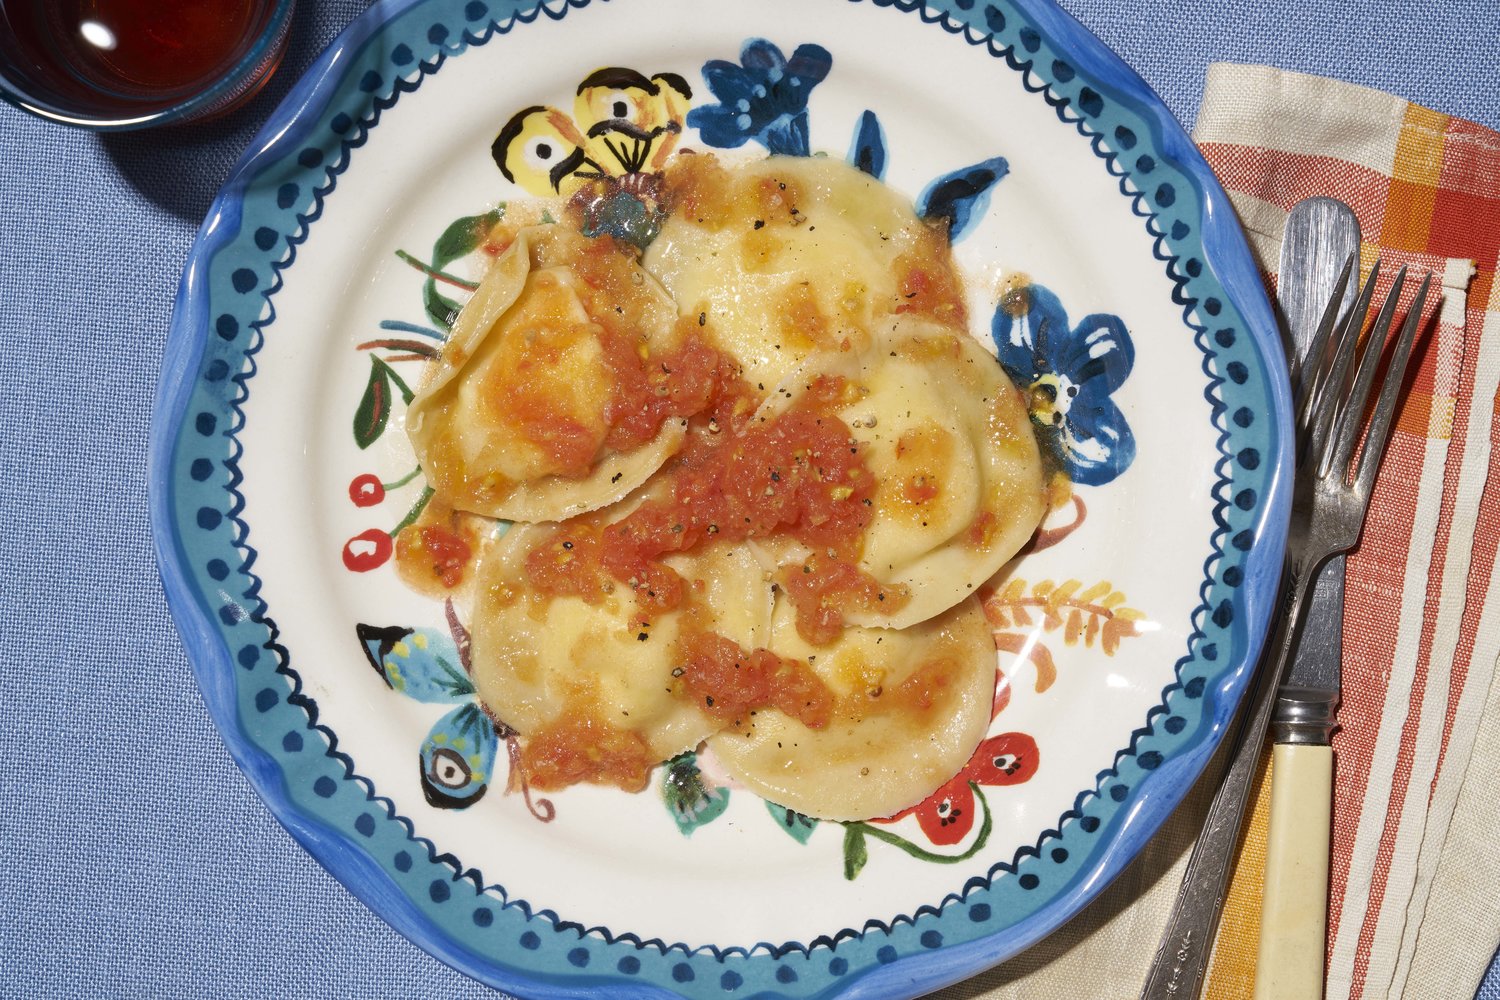 Ravioli or calzones with tomato sauce sit atop a white and blue ceramic plate